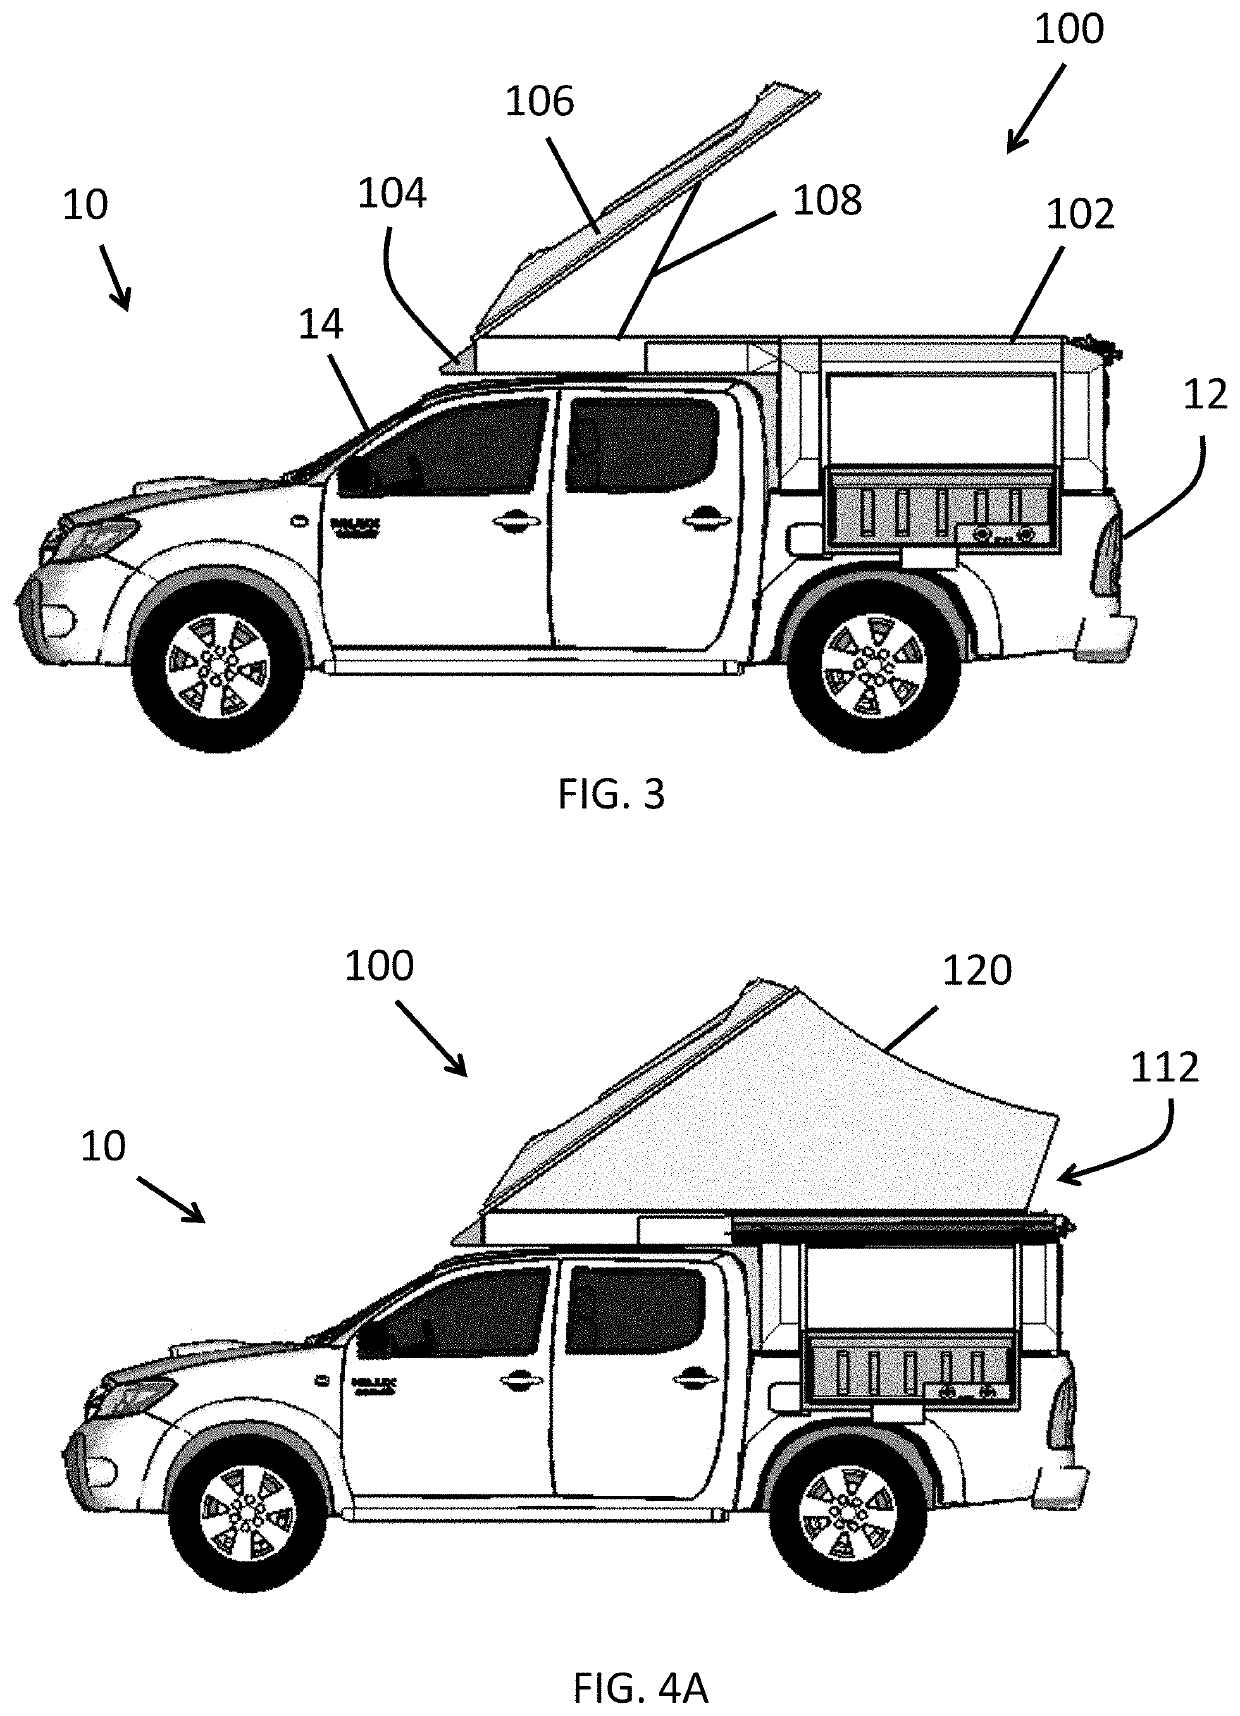 Pop-up camper shell for pickup truck and vehicle roof